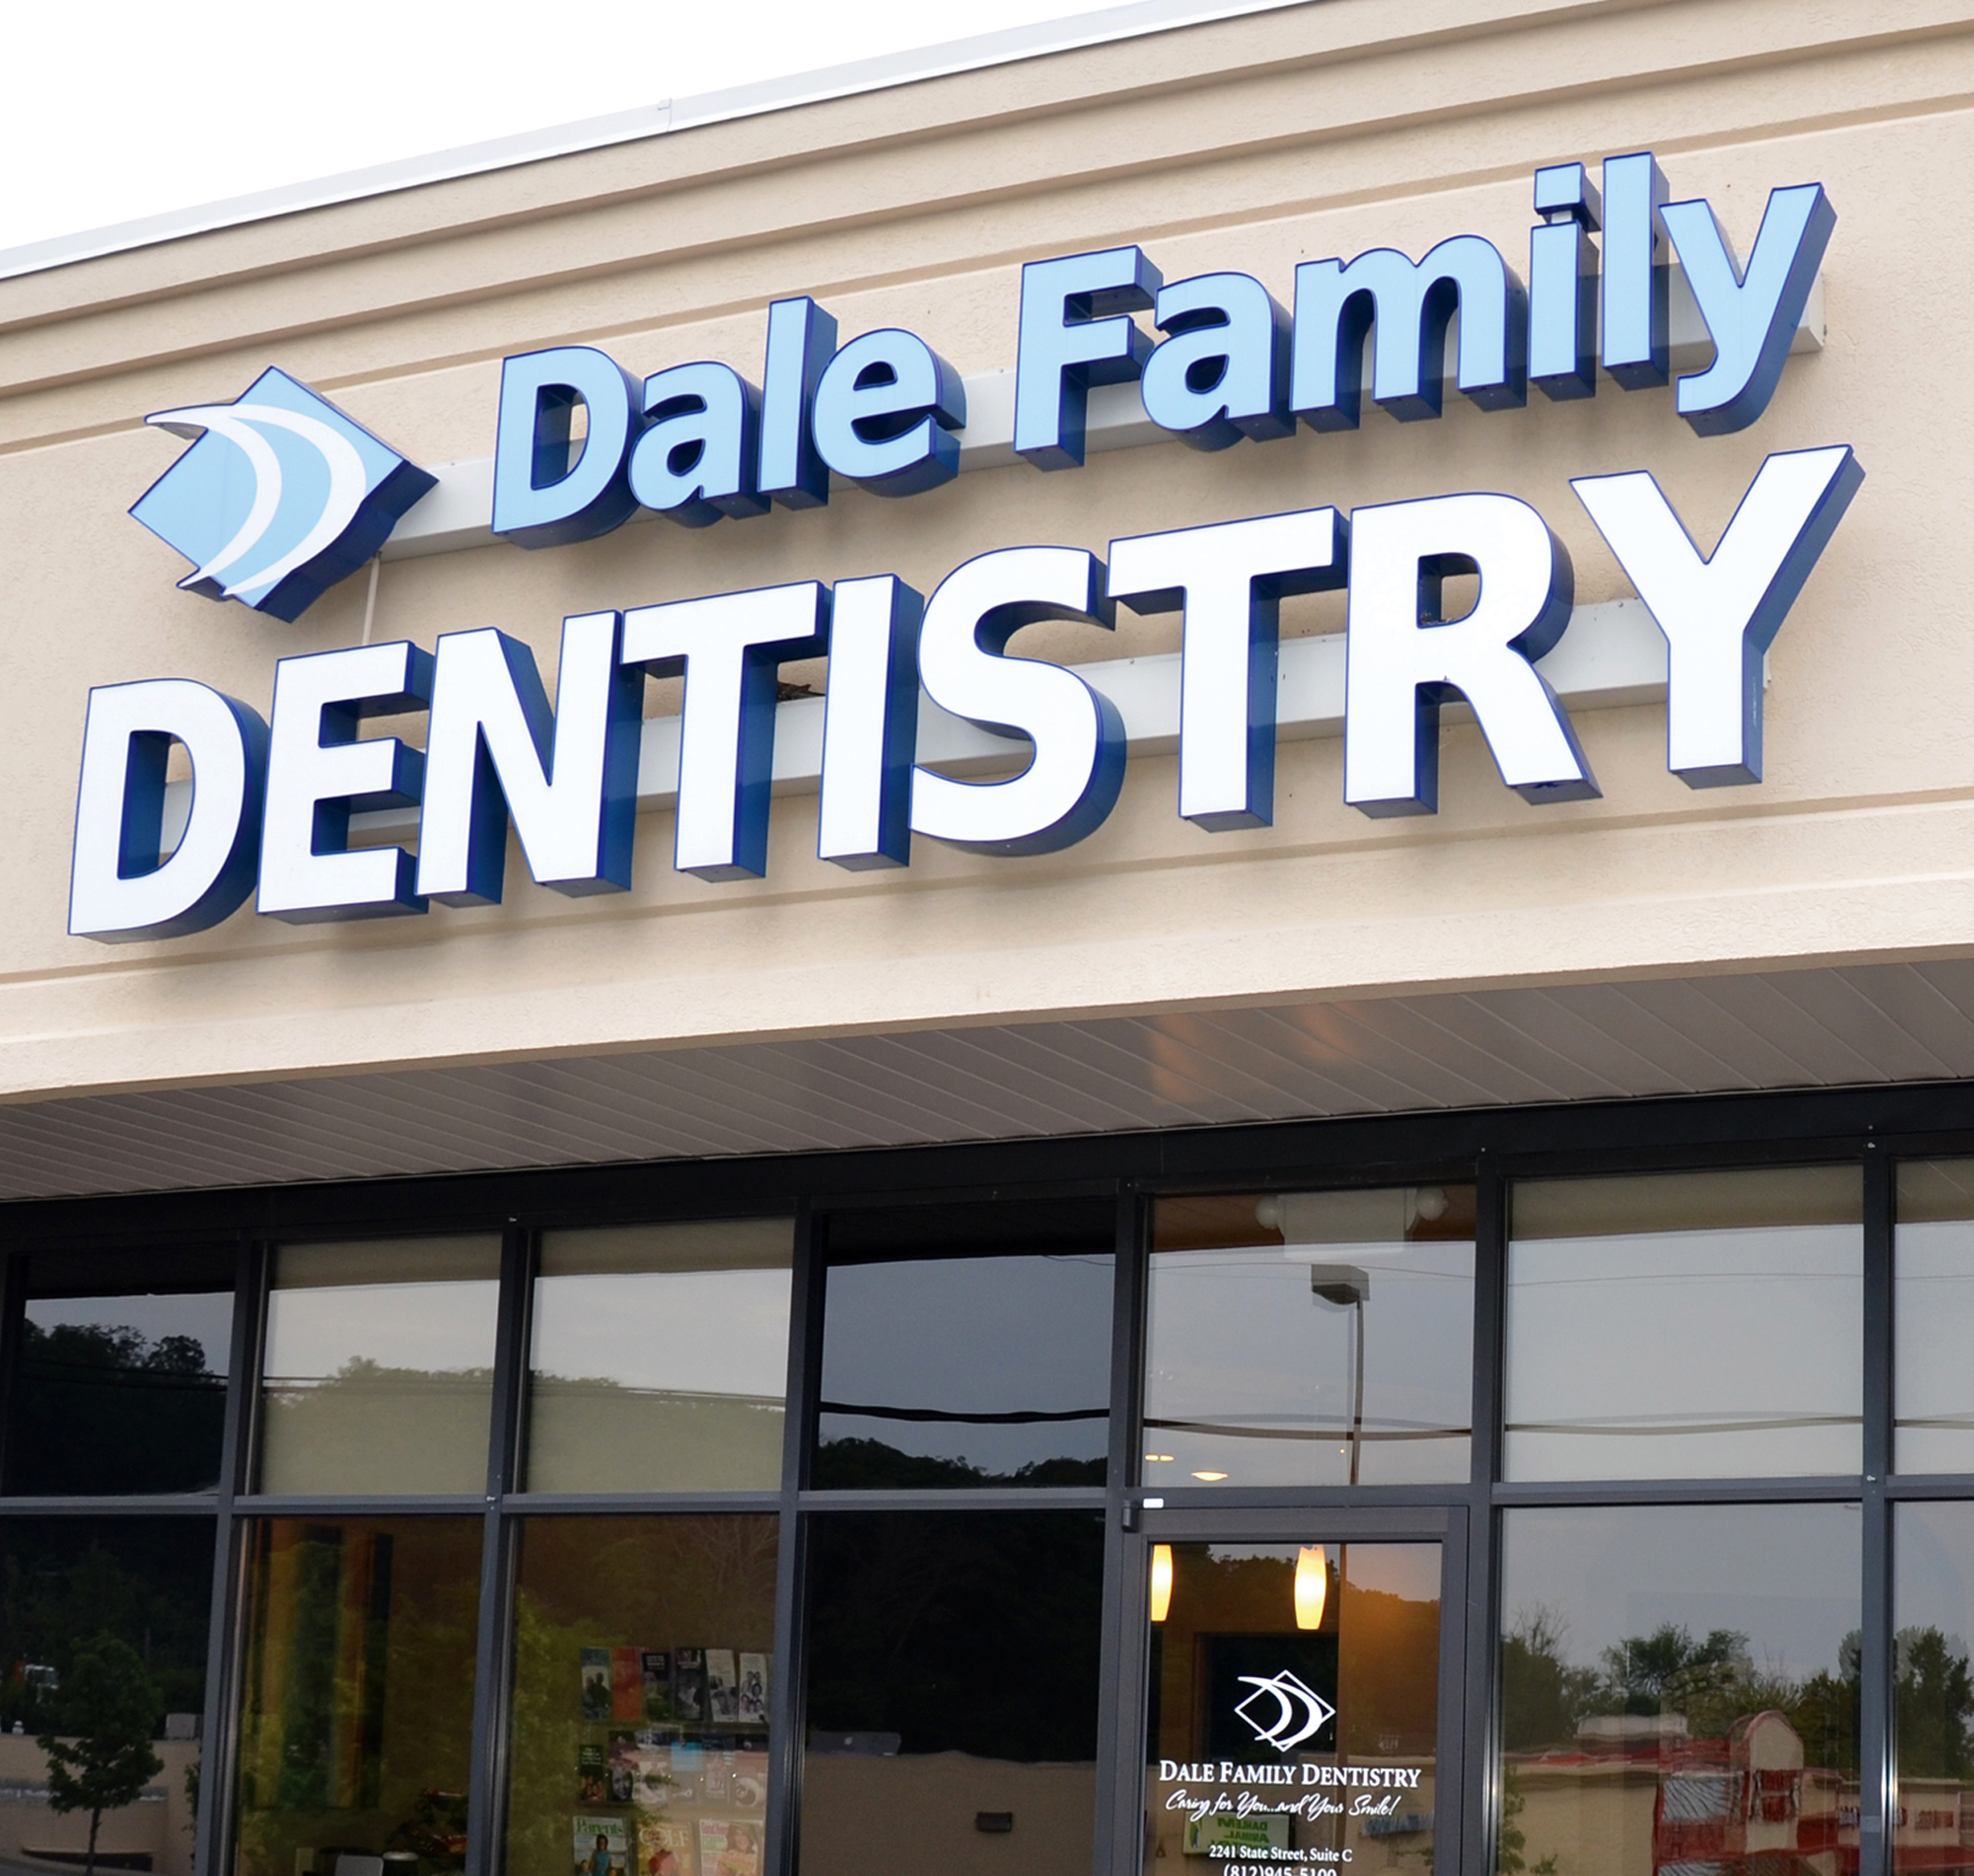 Dale Family Dentistry and chrisad